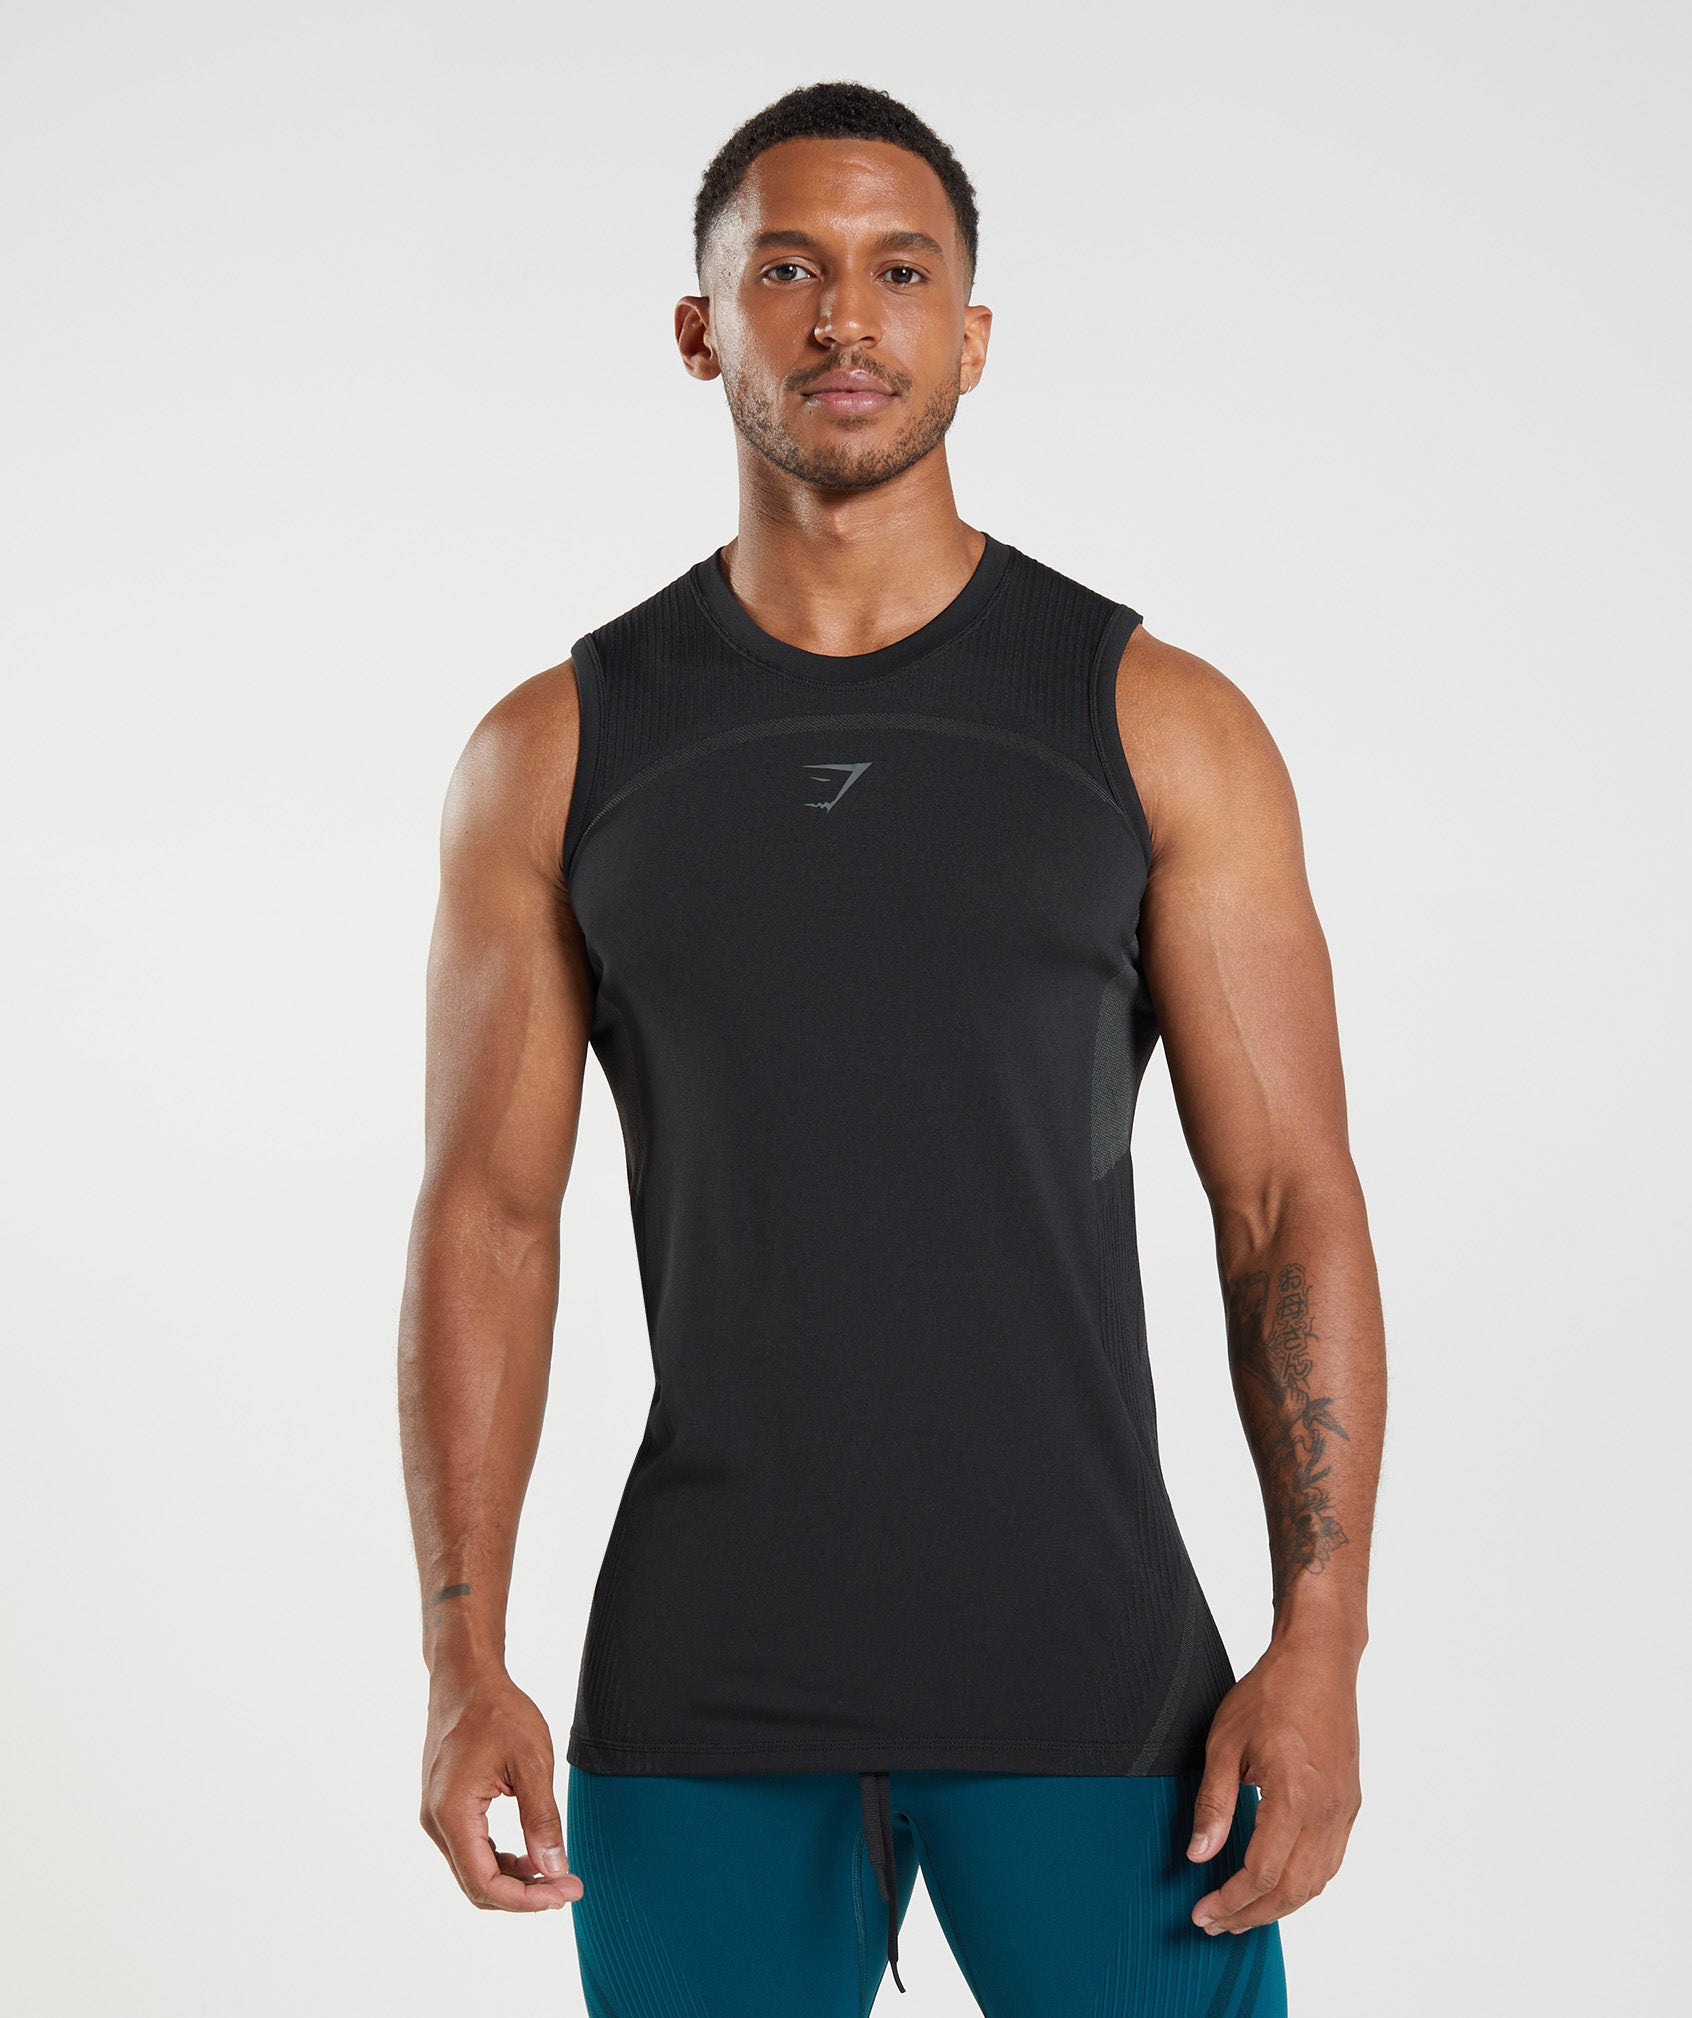 315 Seamless Tank in Black/Charcoal Grey - view 1